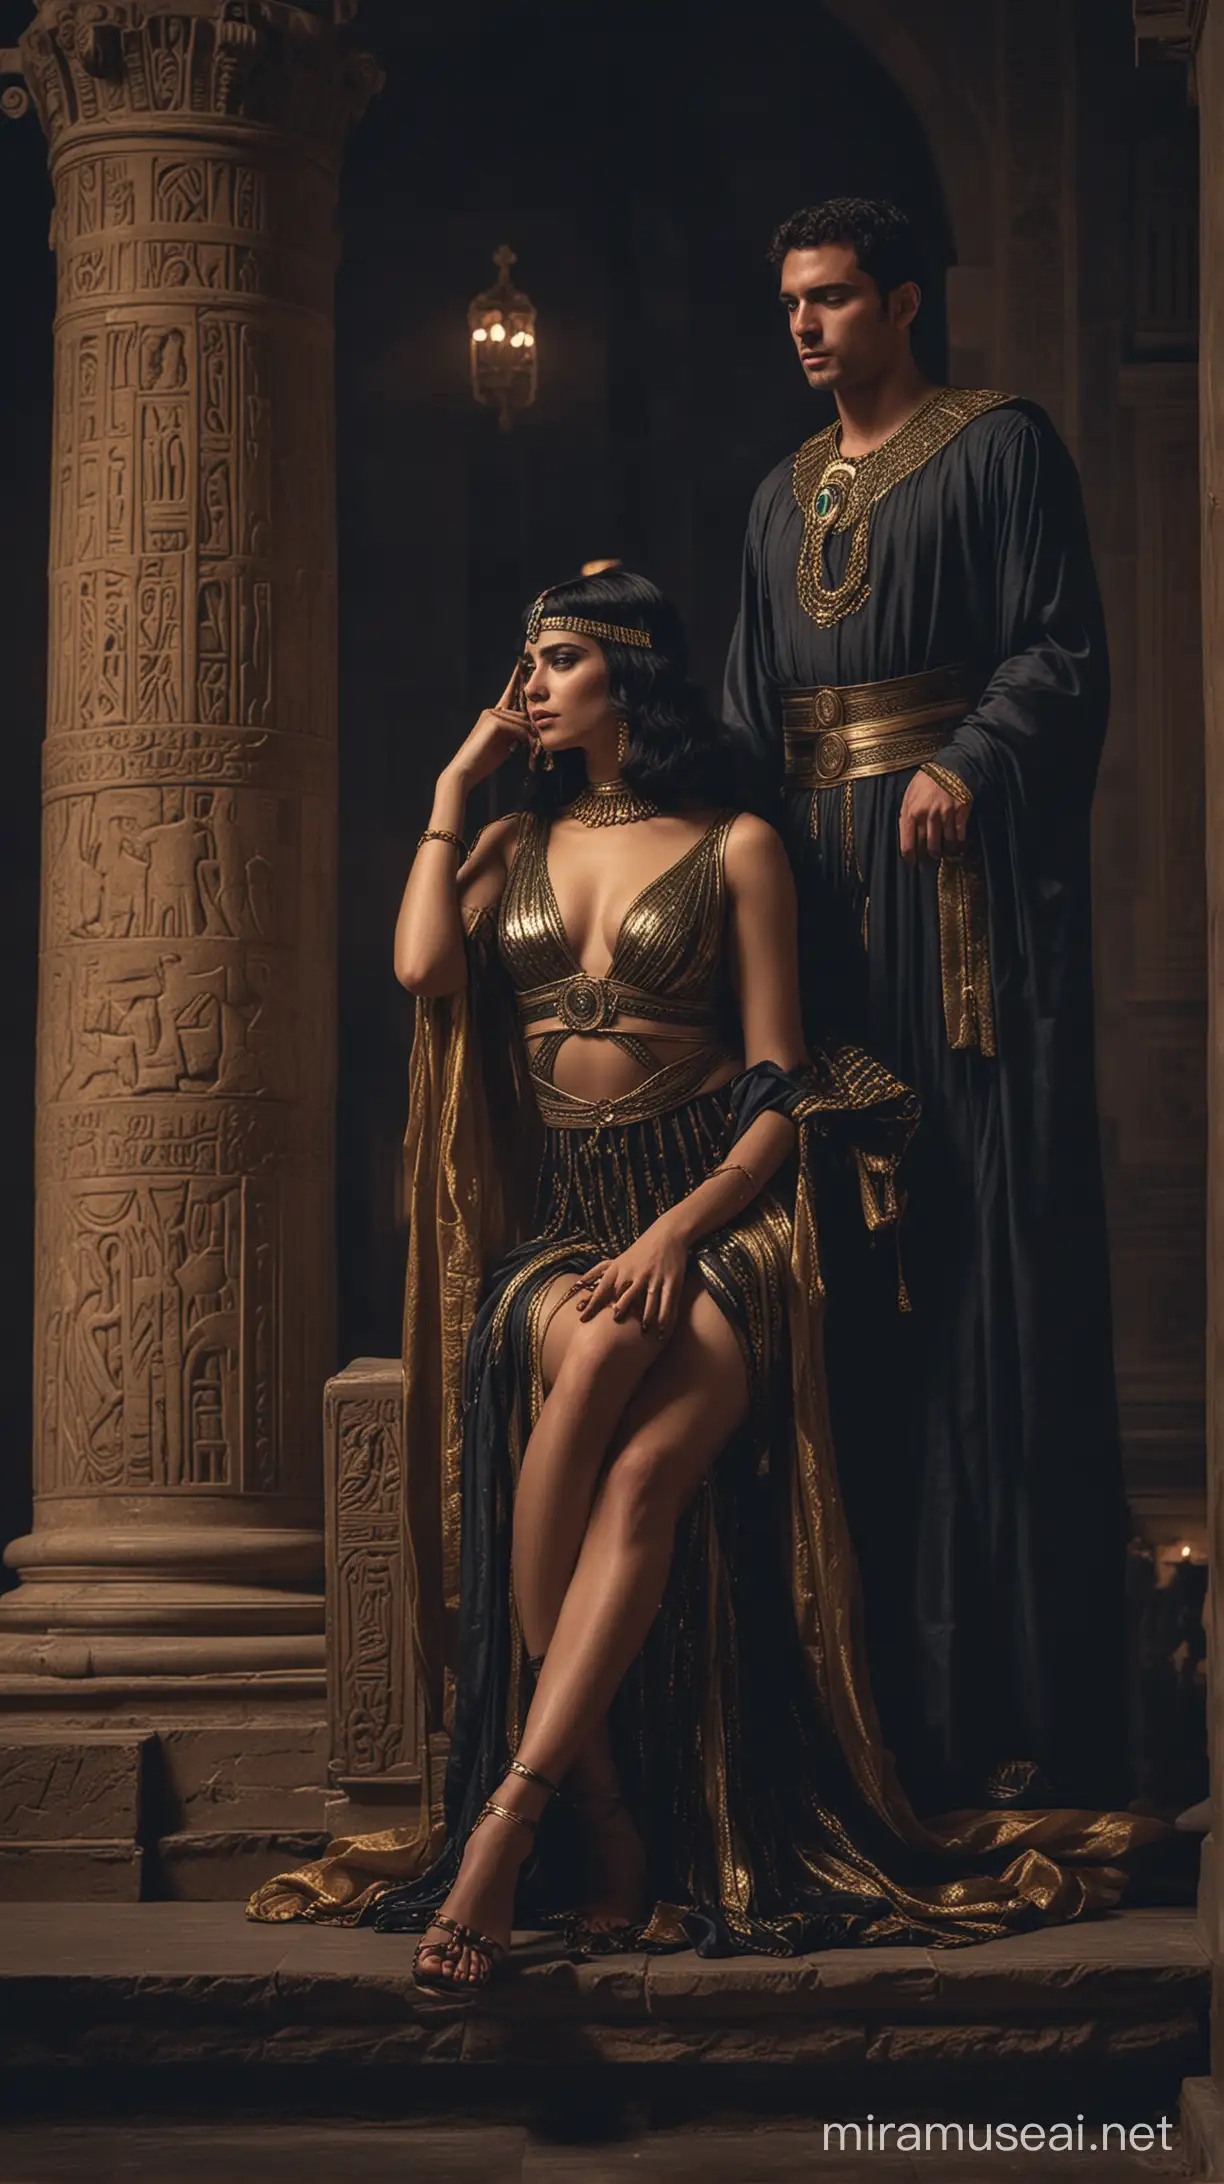 Cleopatra Romance Scene Young Woman in Dark Palace Atmosphere